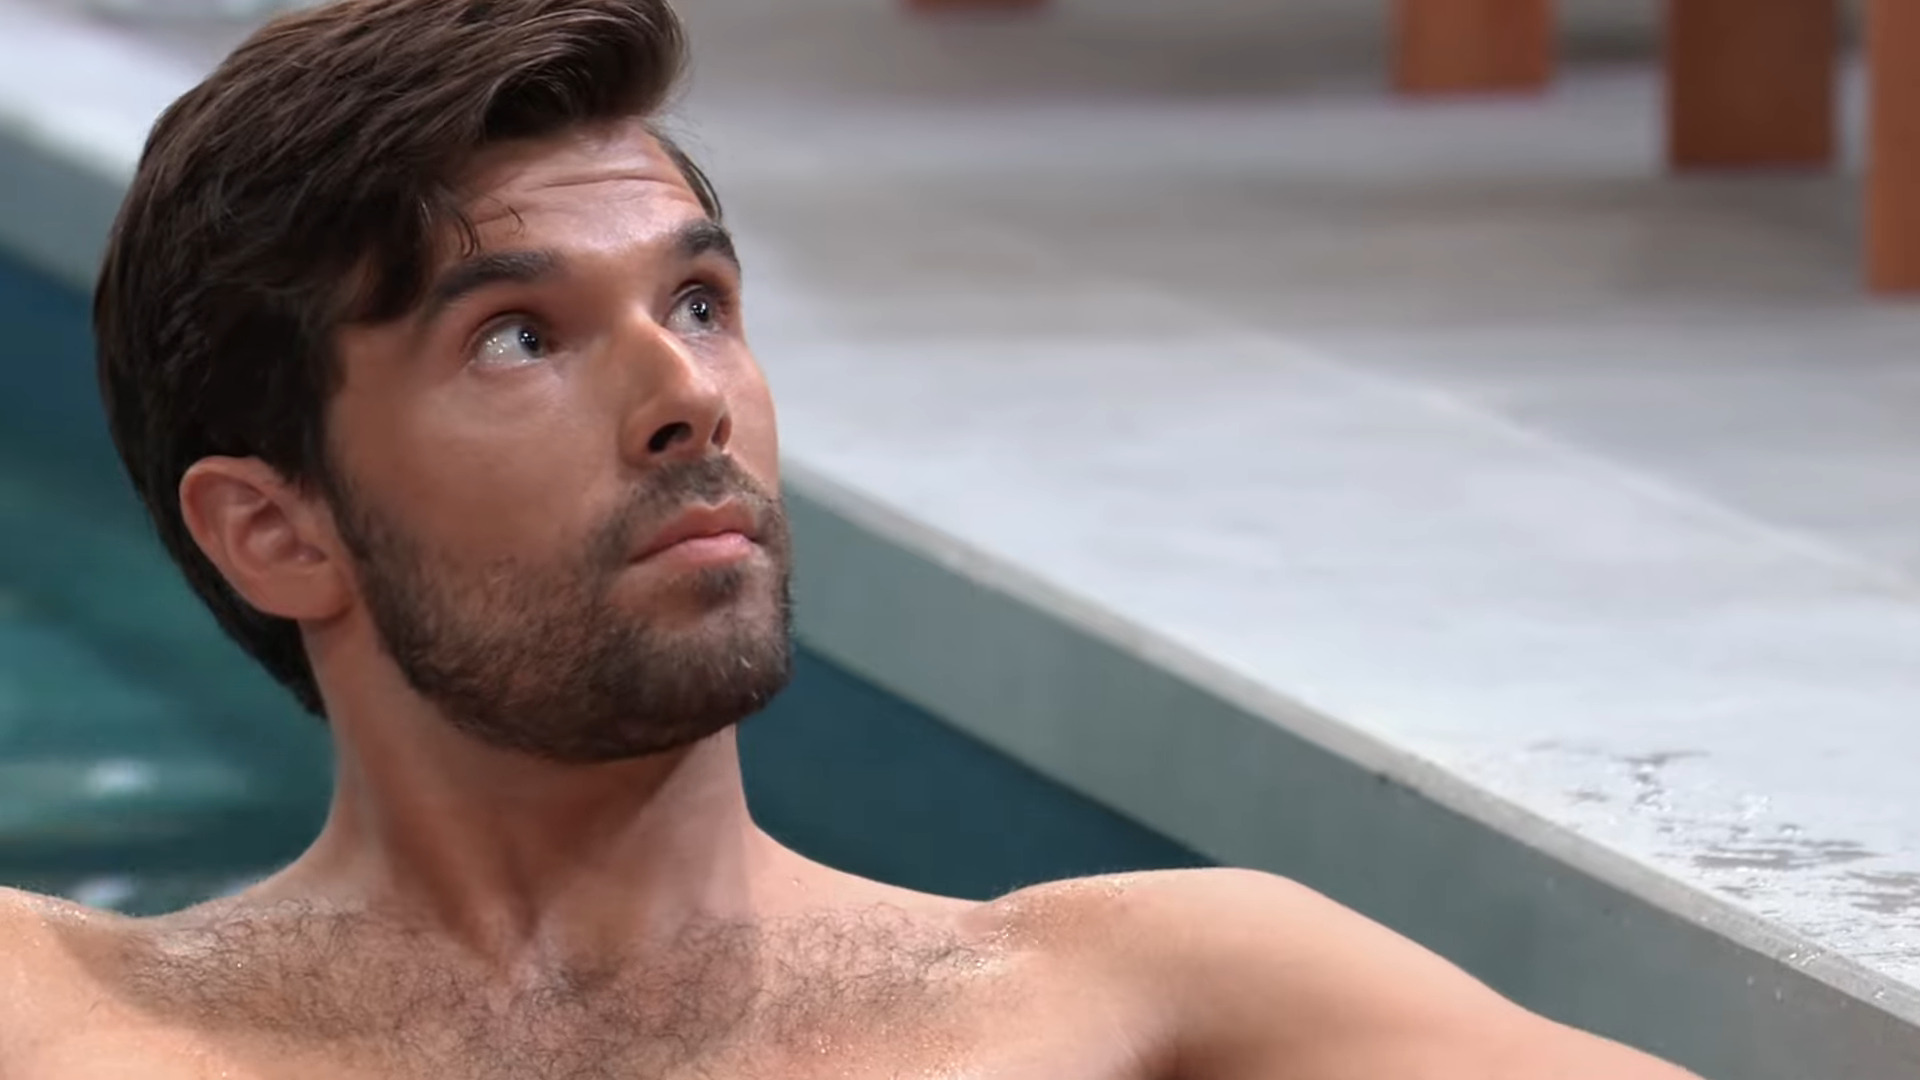 chase asks about back on force GH